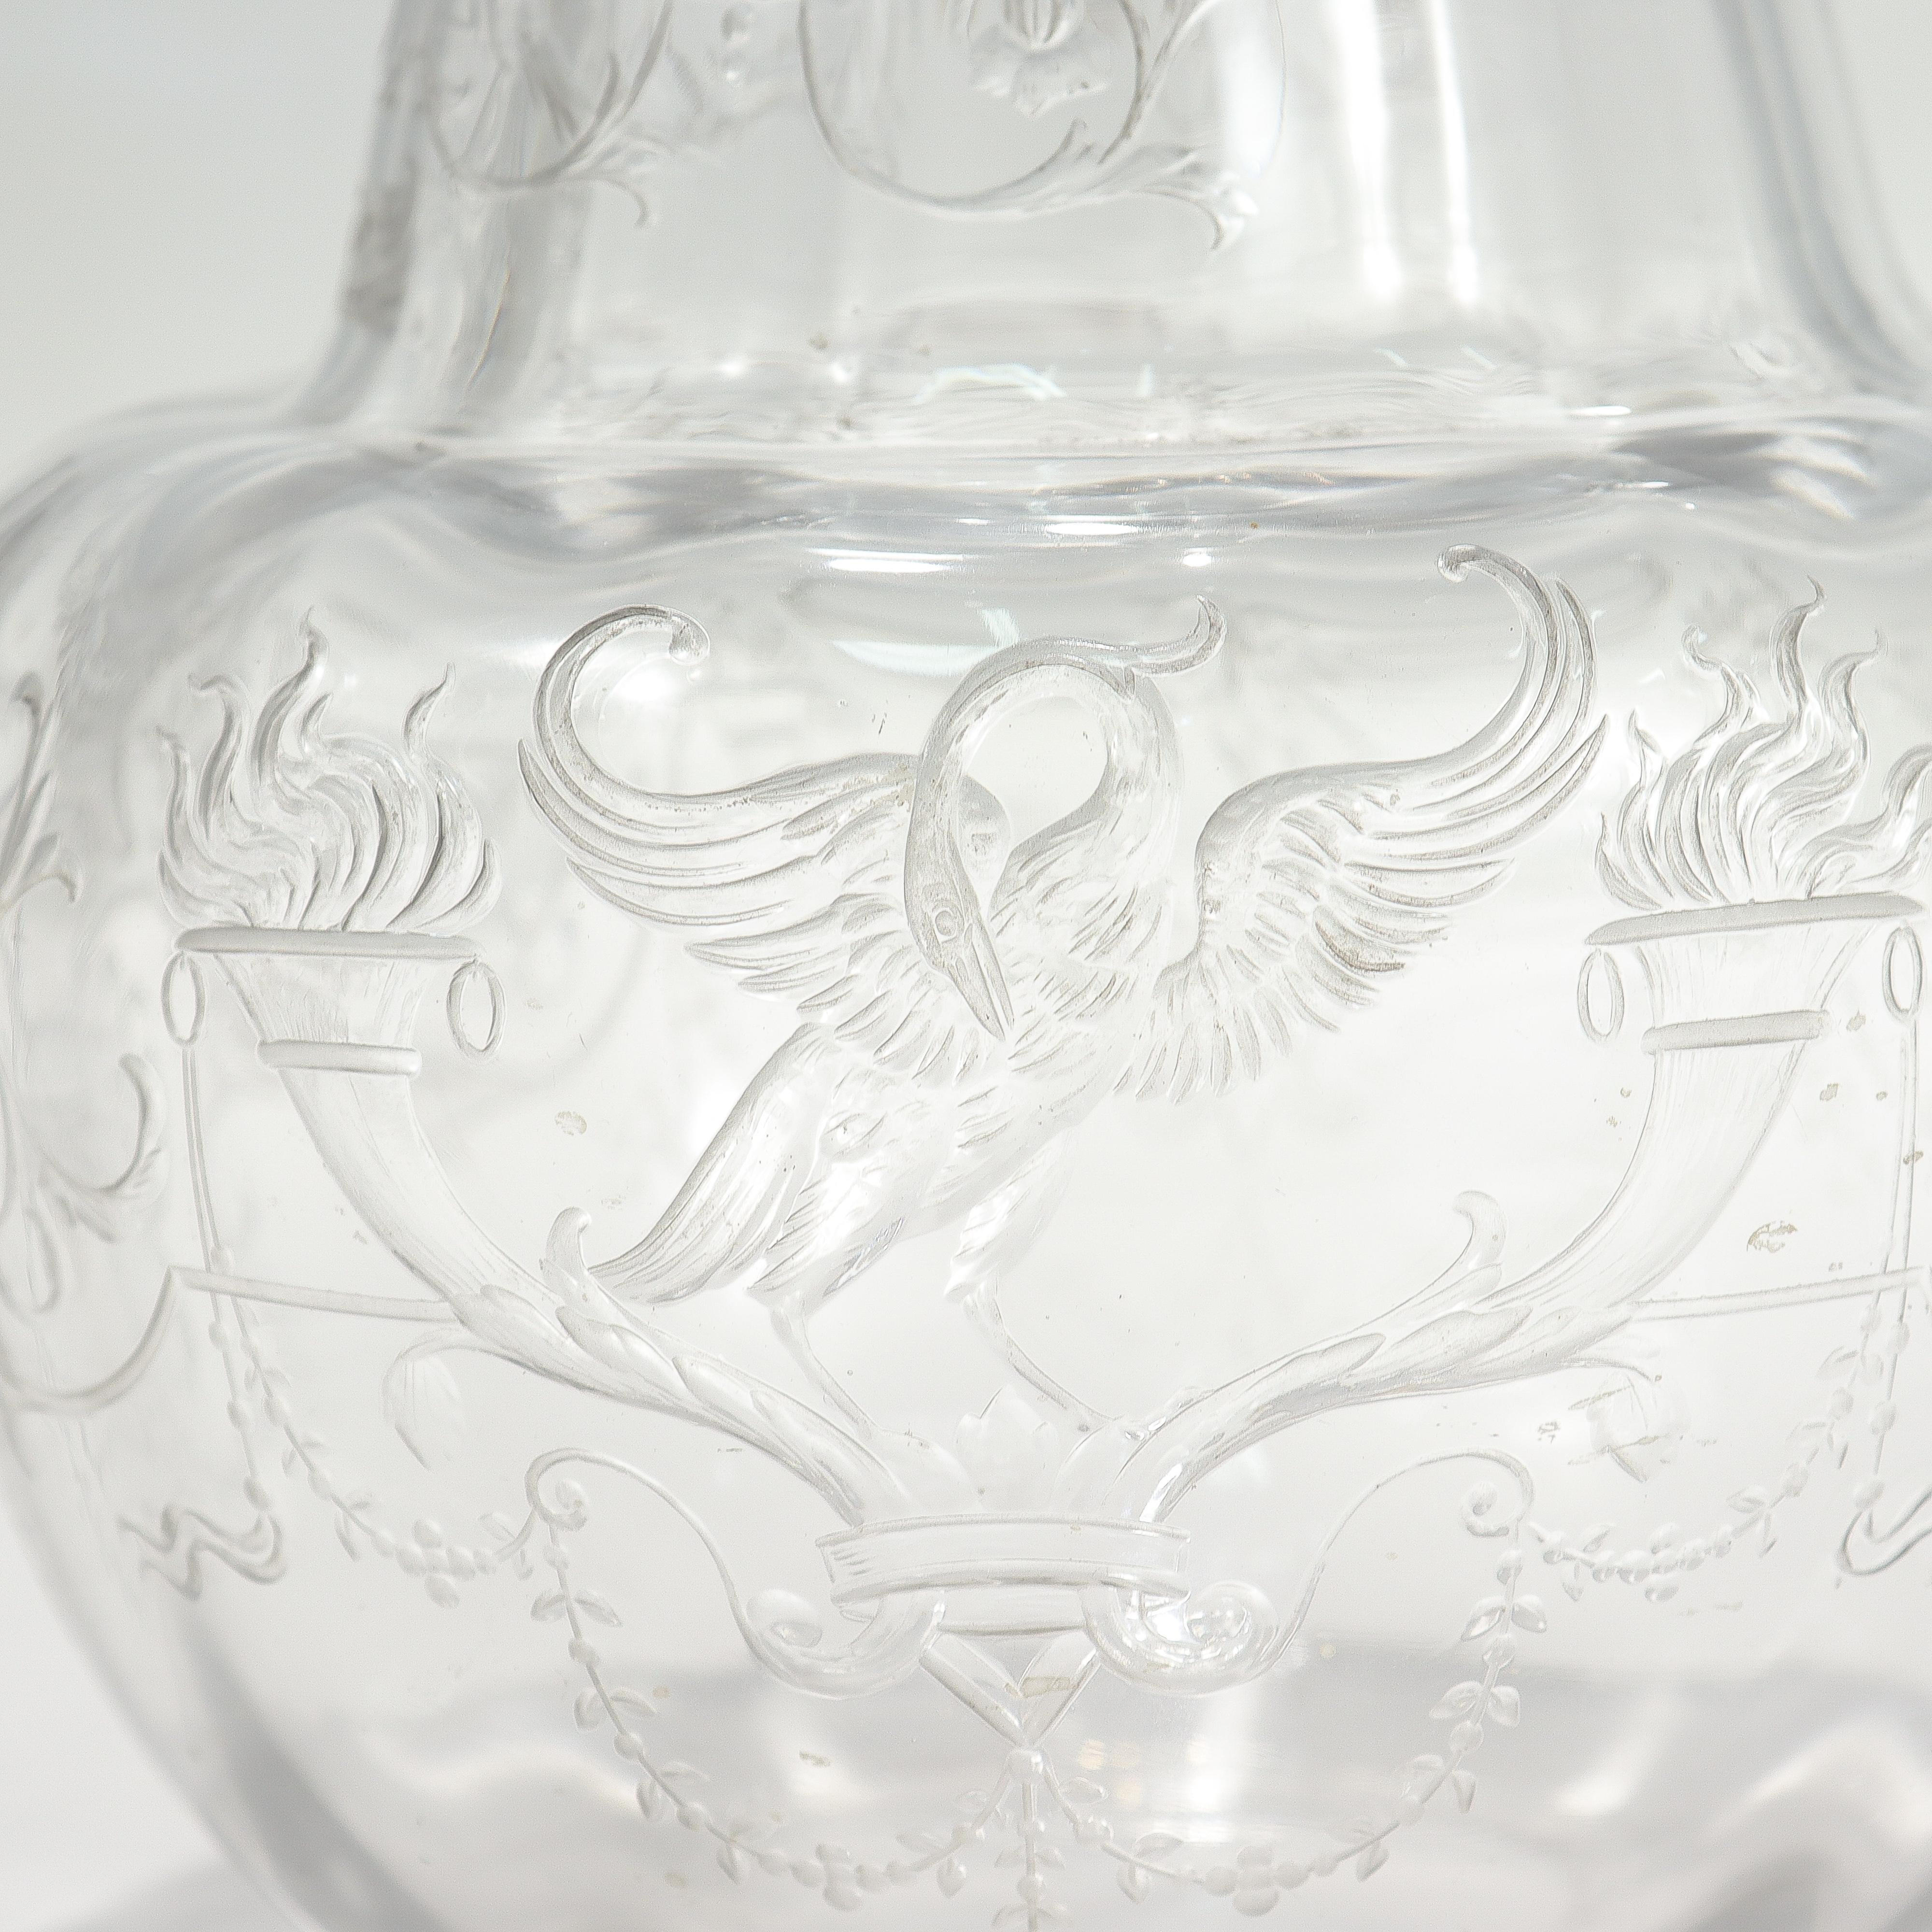 Antique Cut Glass Pitcher with Birds & Phoenix Attributed to Stevens & Williams For Sale 8